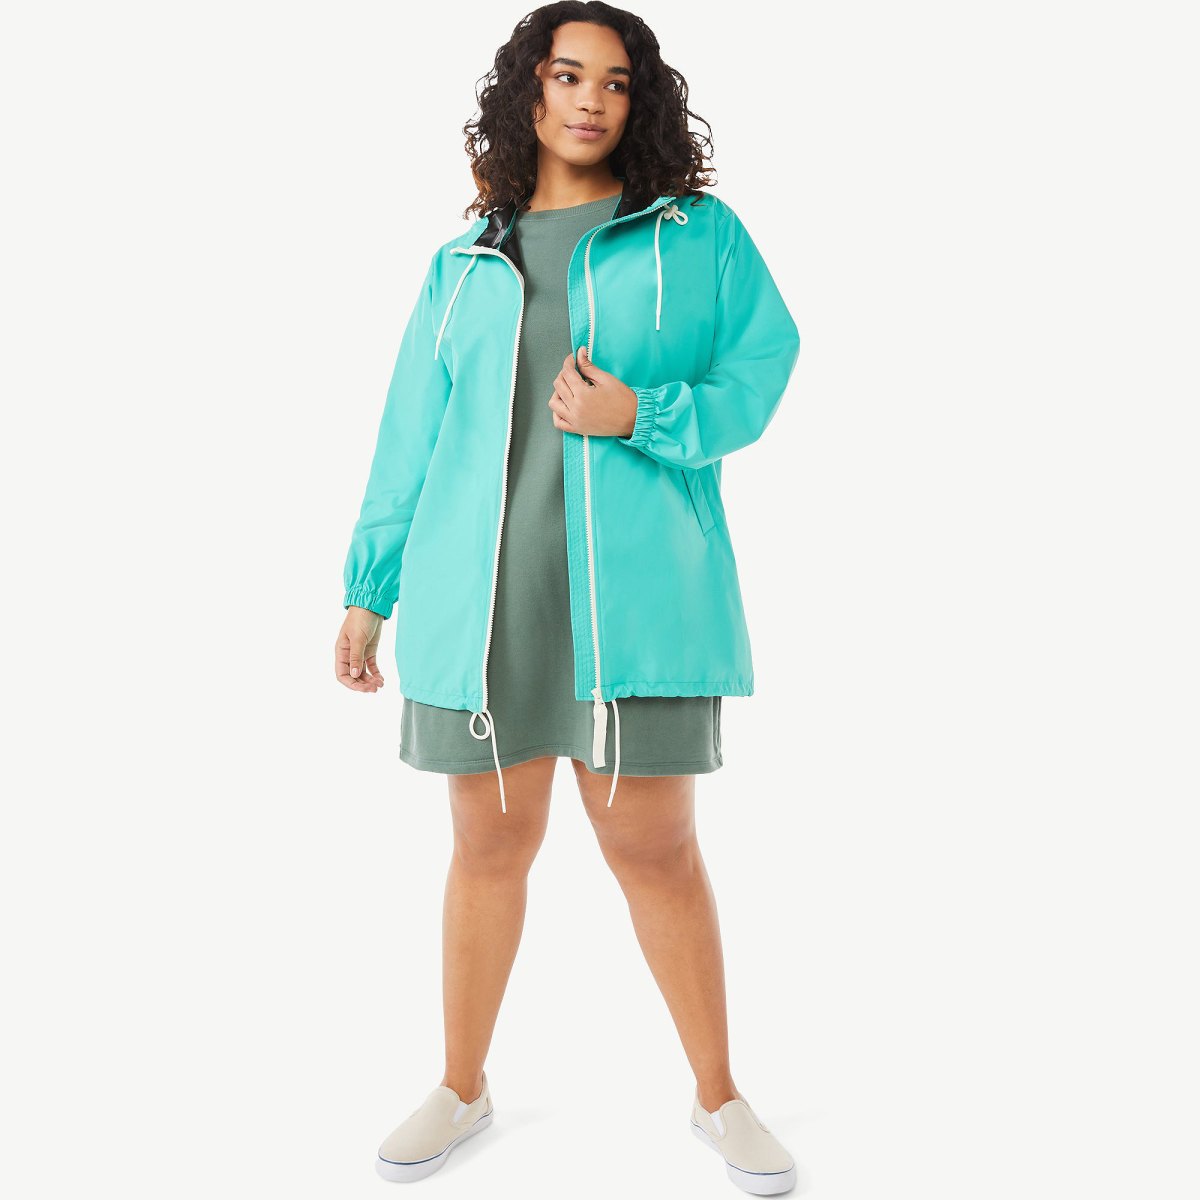 Free Assembly Sustainable Rain Jacket Is 50% Off and Packable | Us Weekly